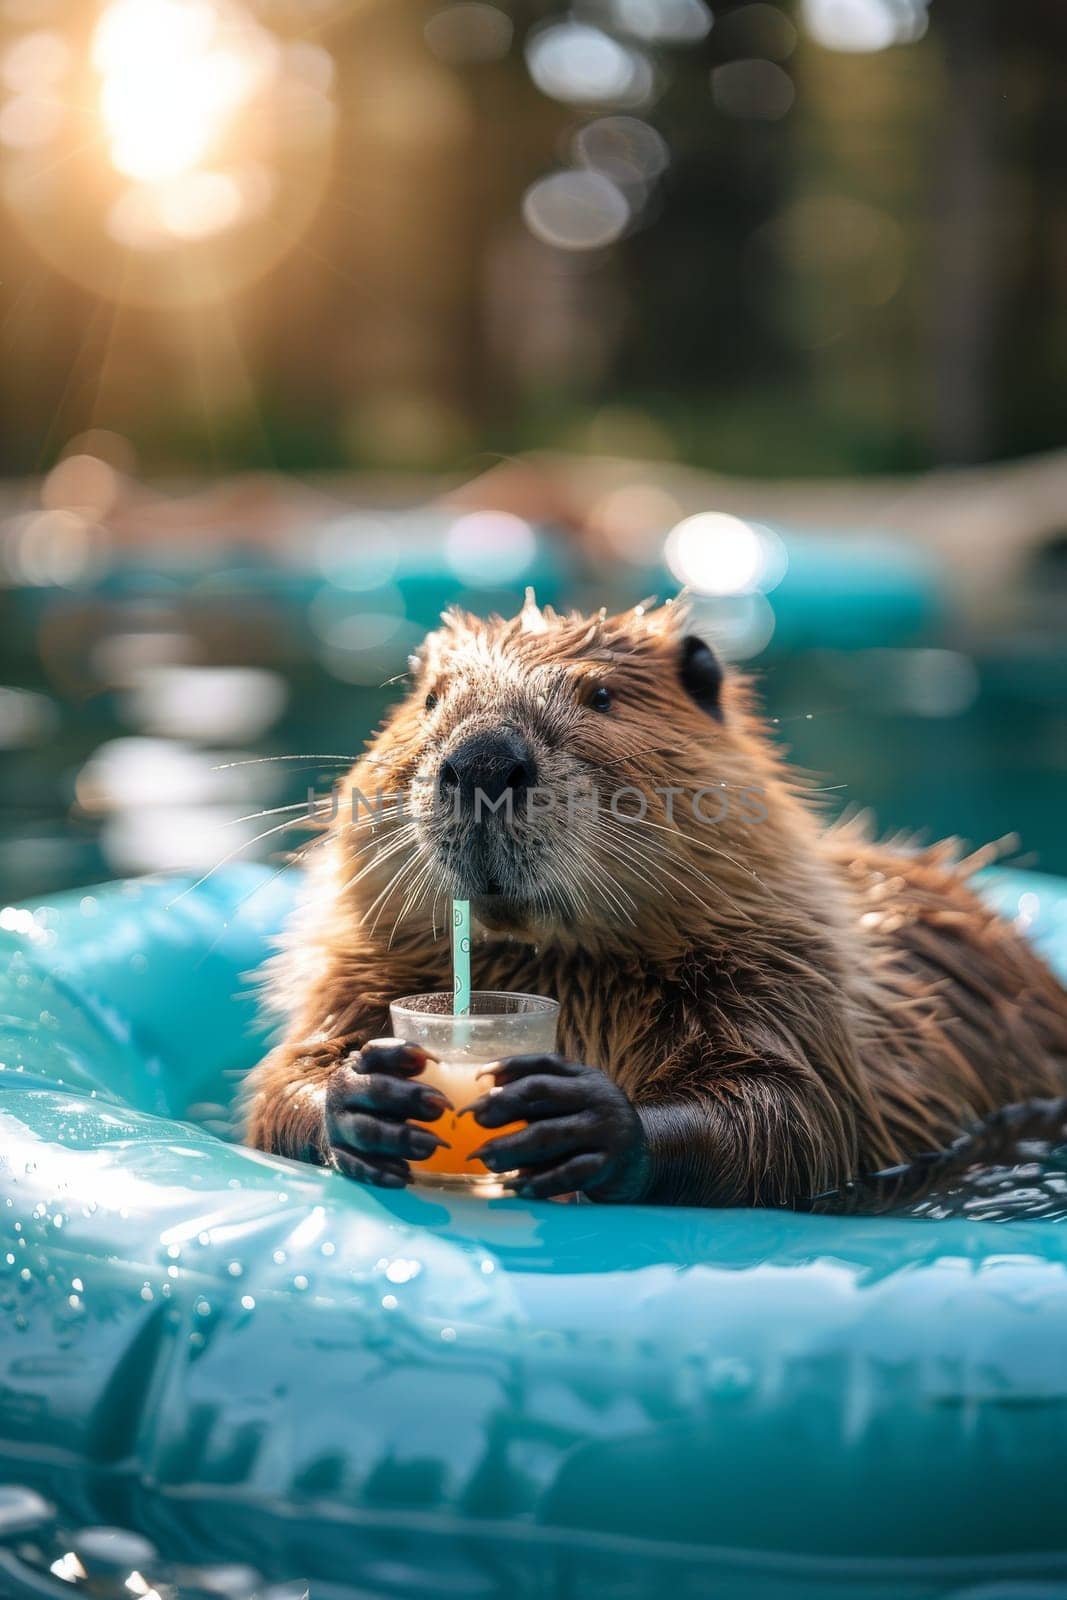 beaver animal is in a pool with a cup in its mouth by itchaznong